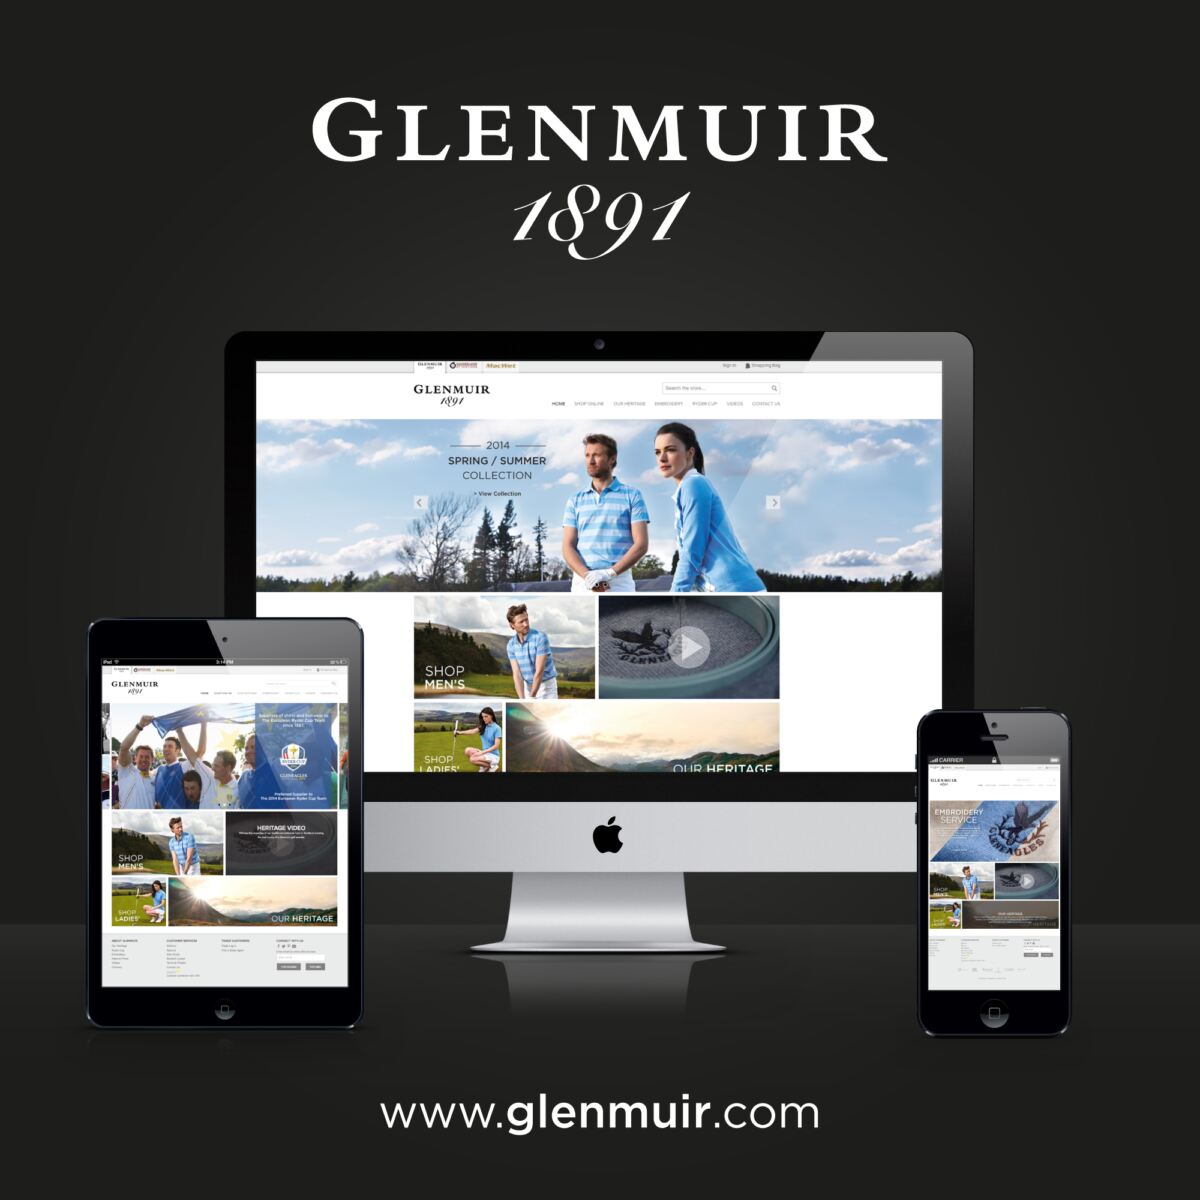 Glenmuir Goes Back to its Roots with Brand New Website